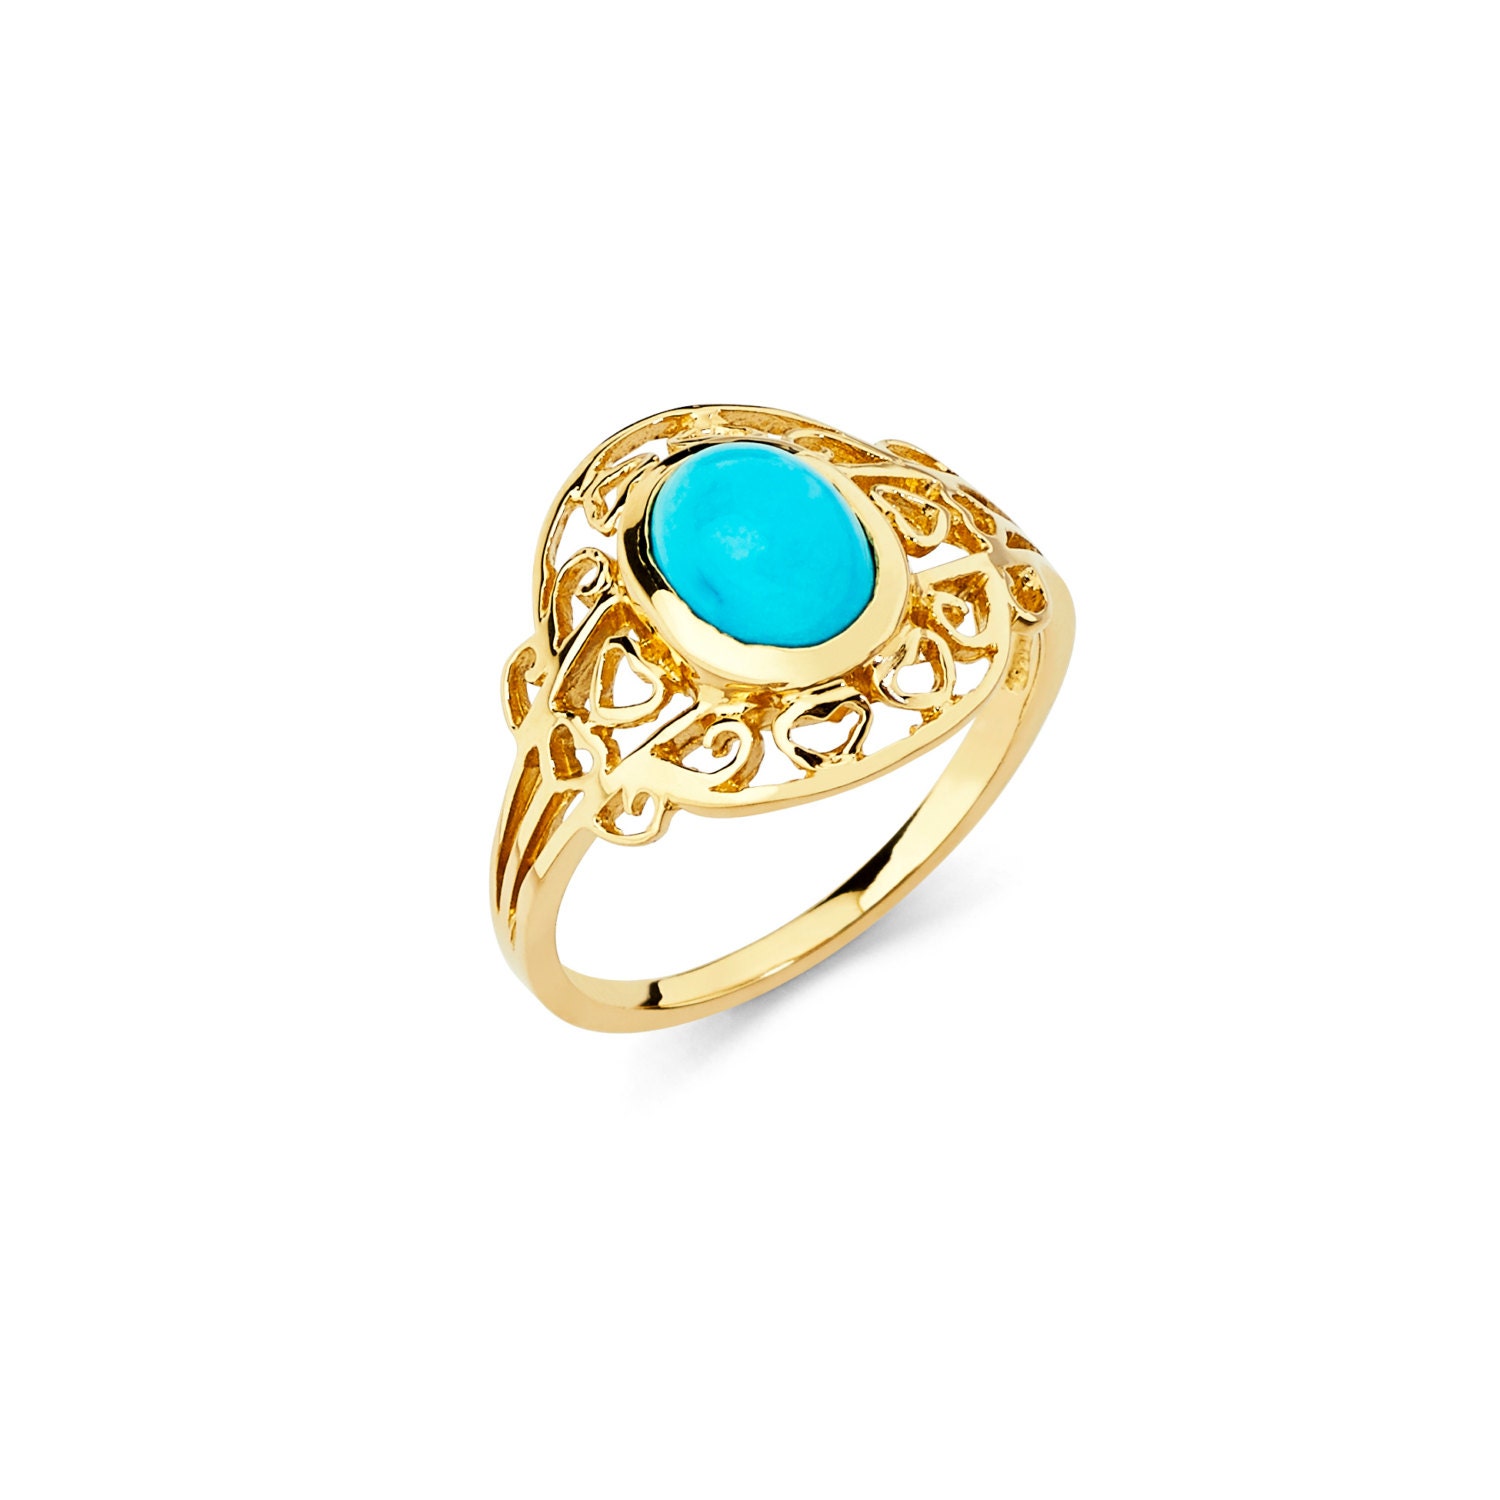 Tibetan Turquoise Ring | Made In Earth US